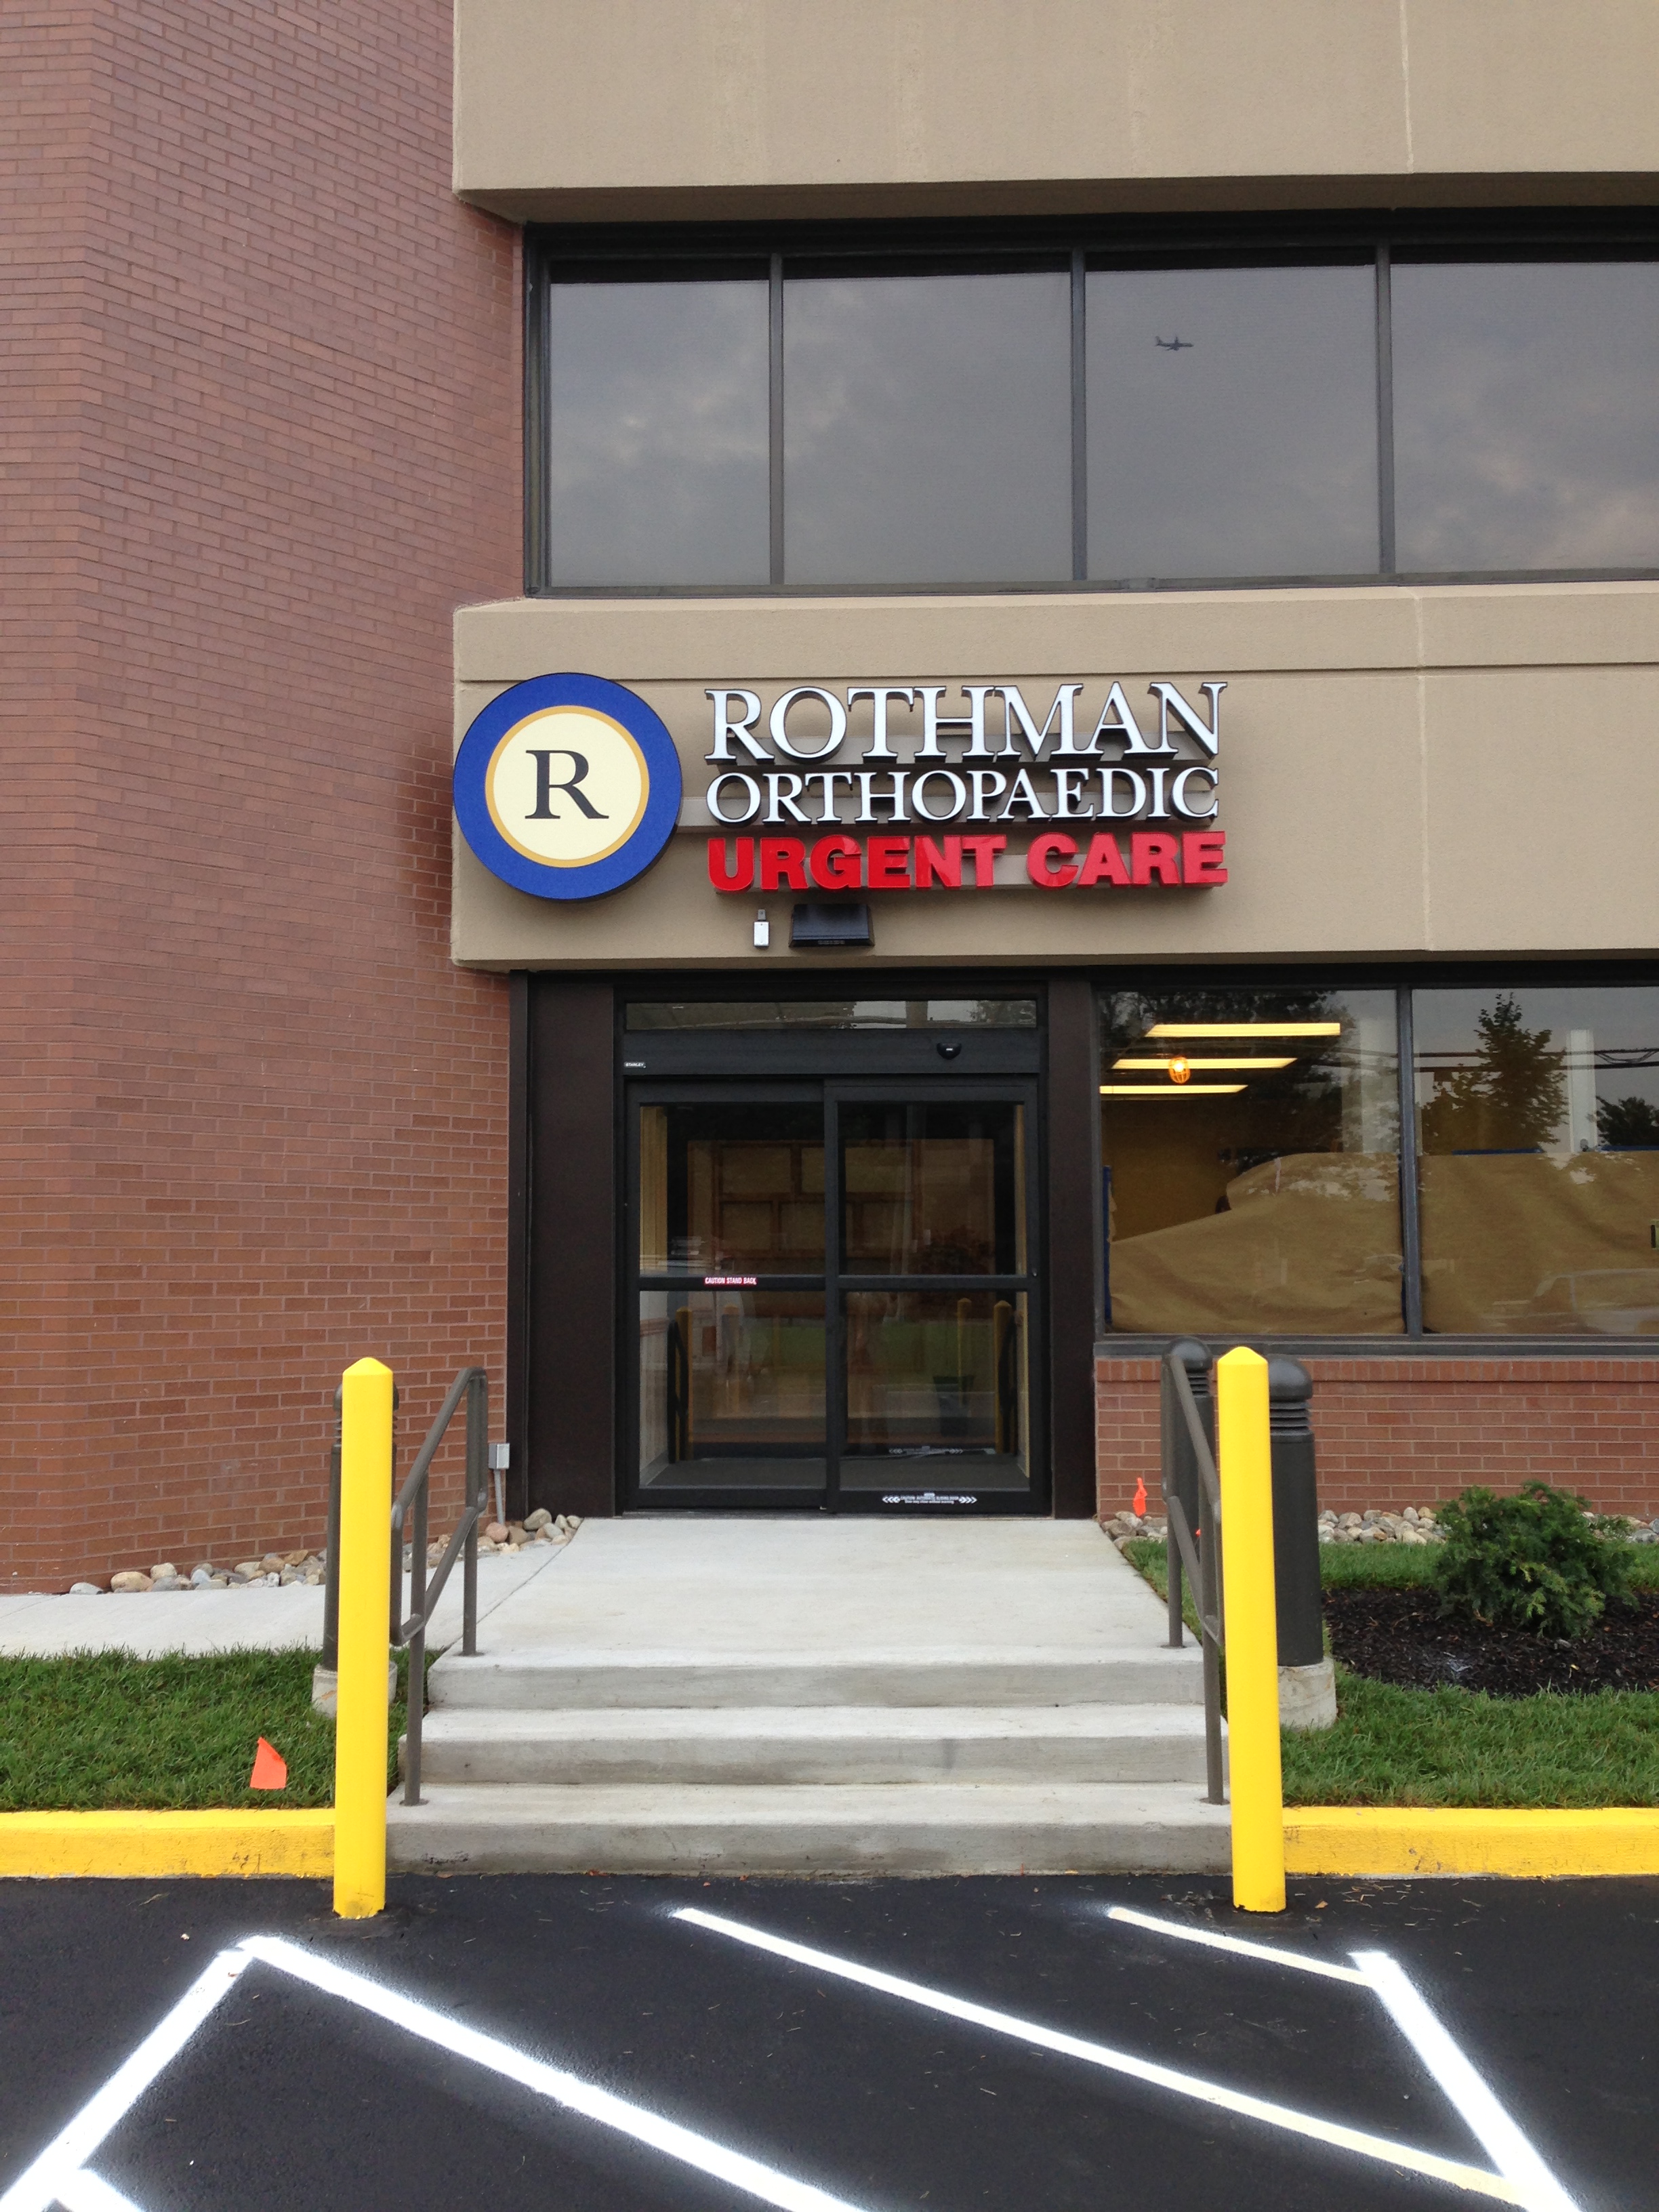 Rothman Orthopaedic Urgent Care opened today in Marlton